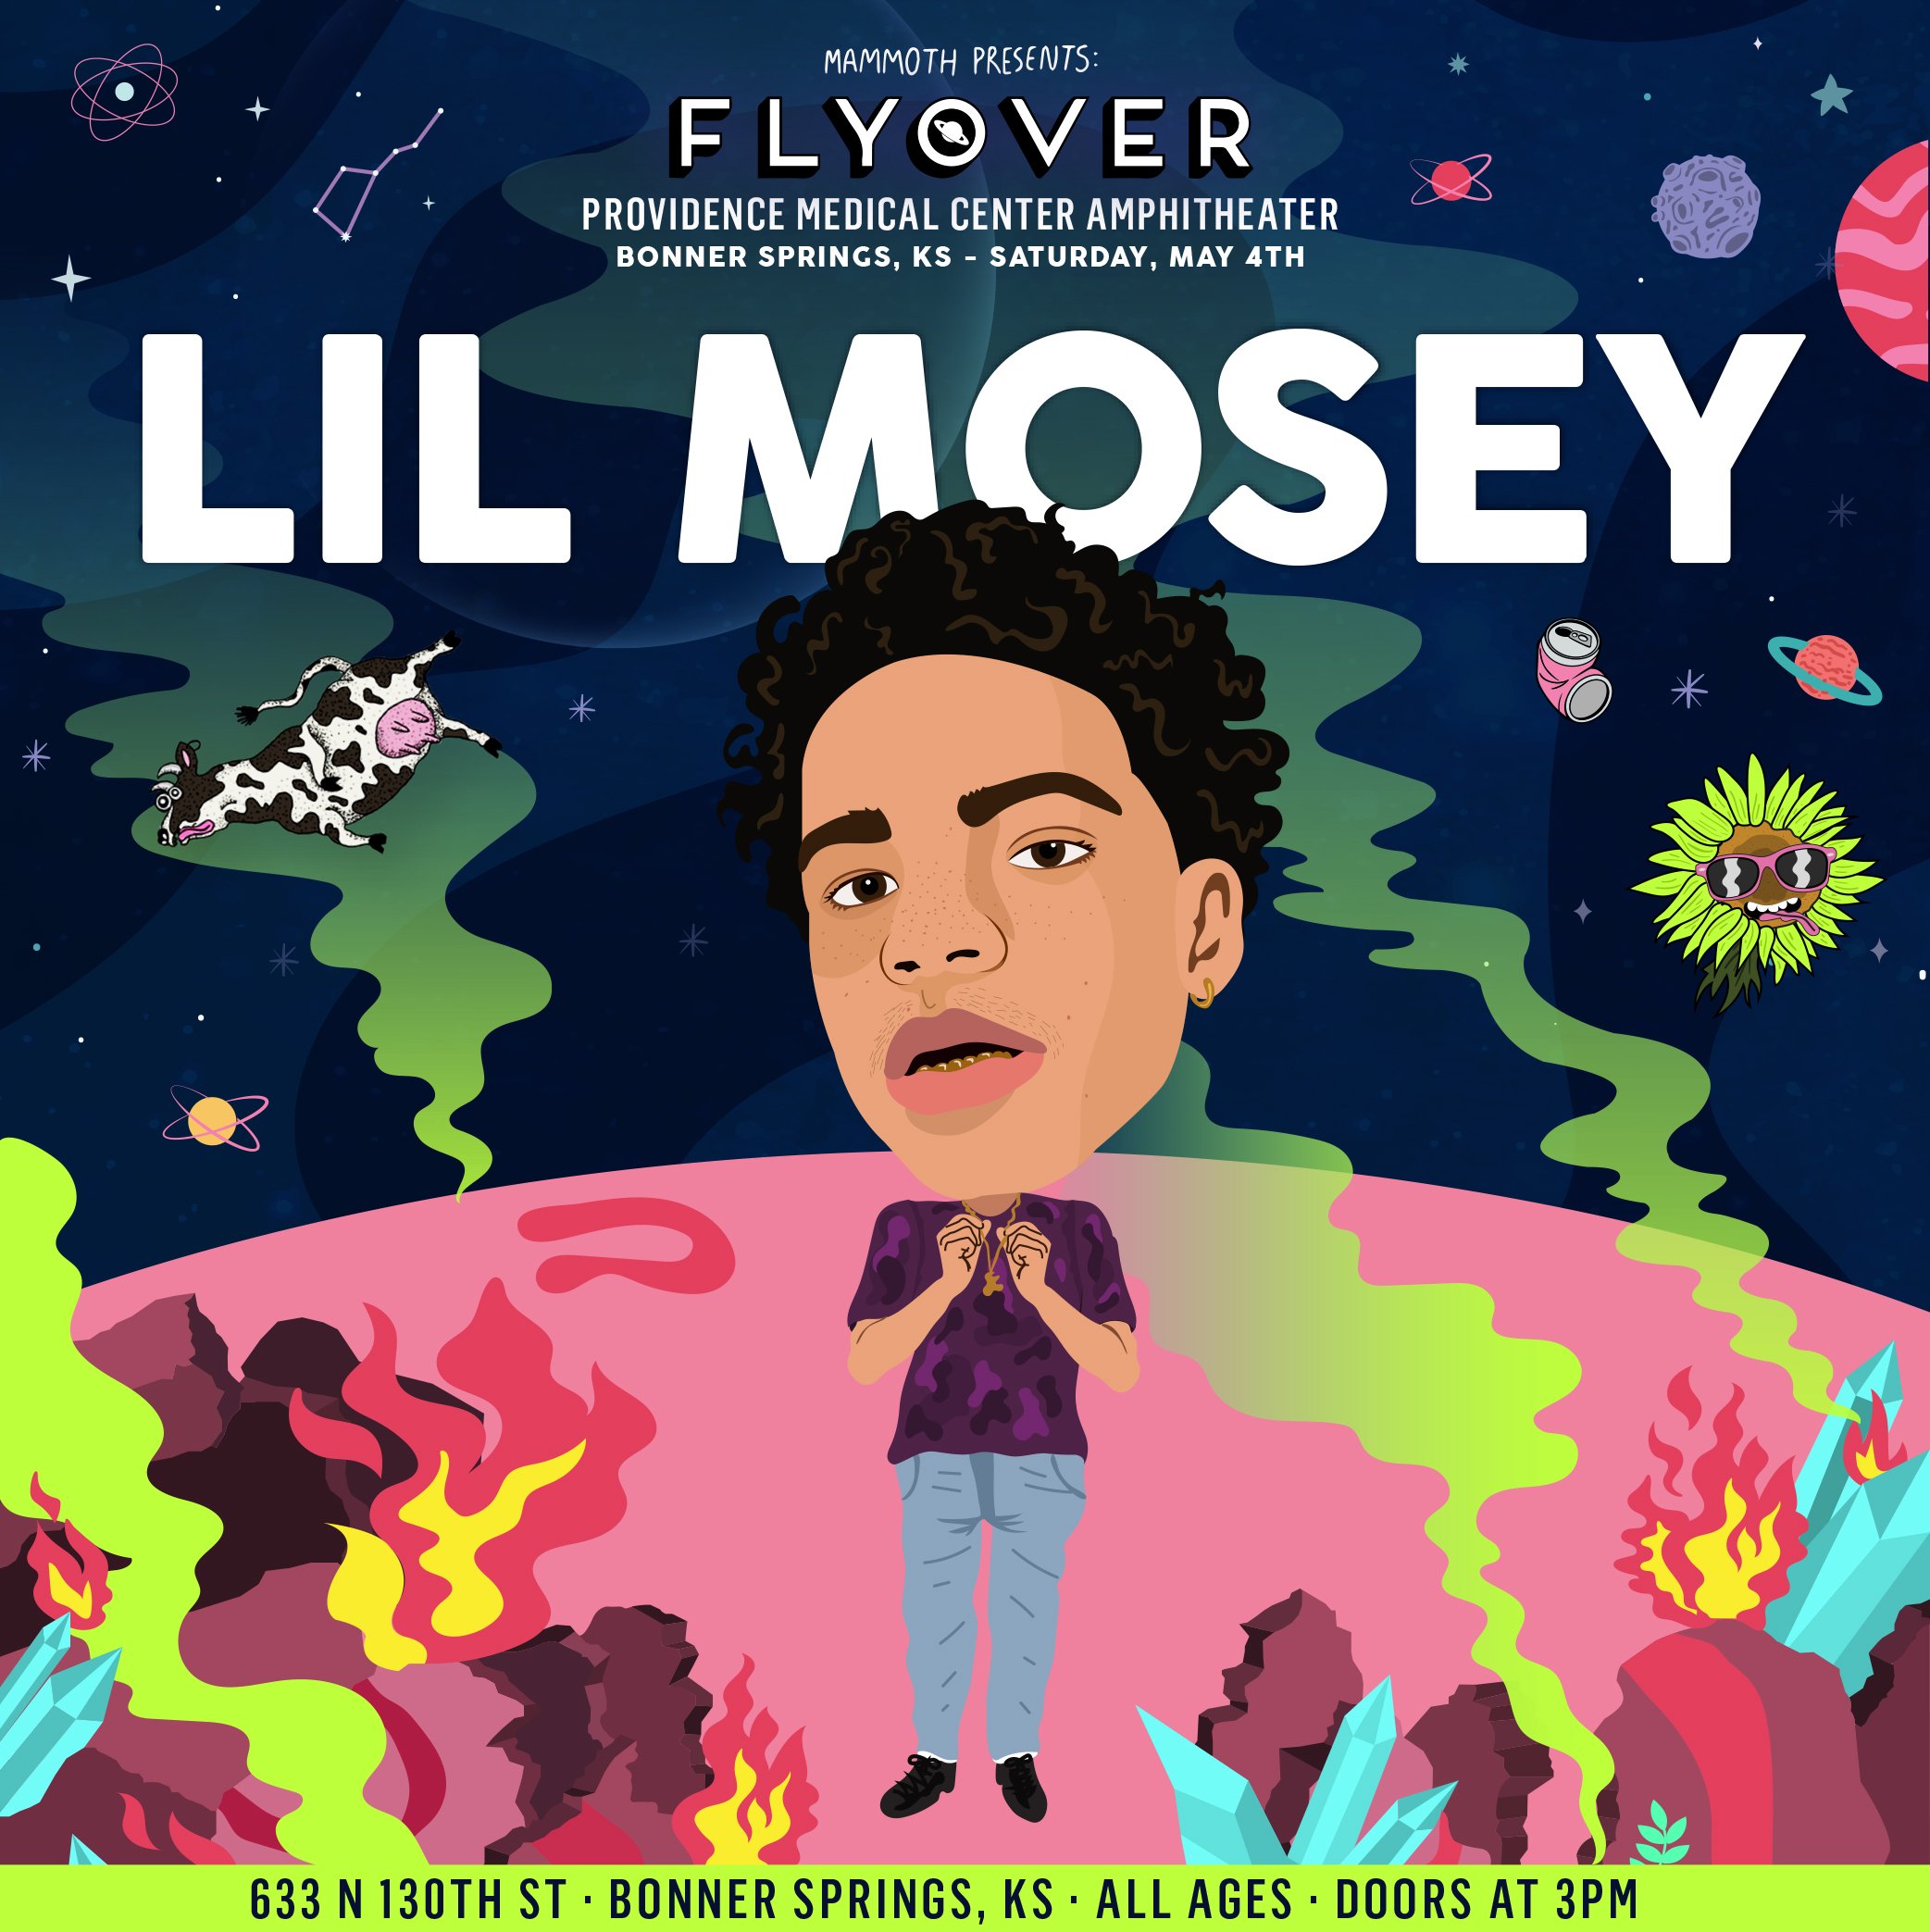 Flyover 2019 21 Lil Mosey.jpg